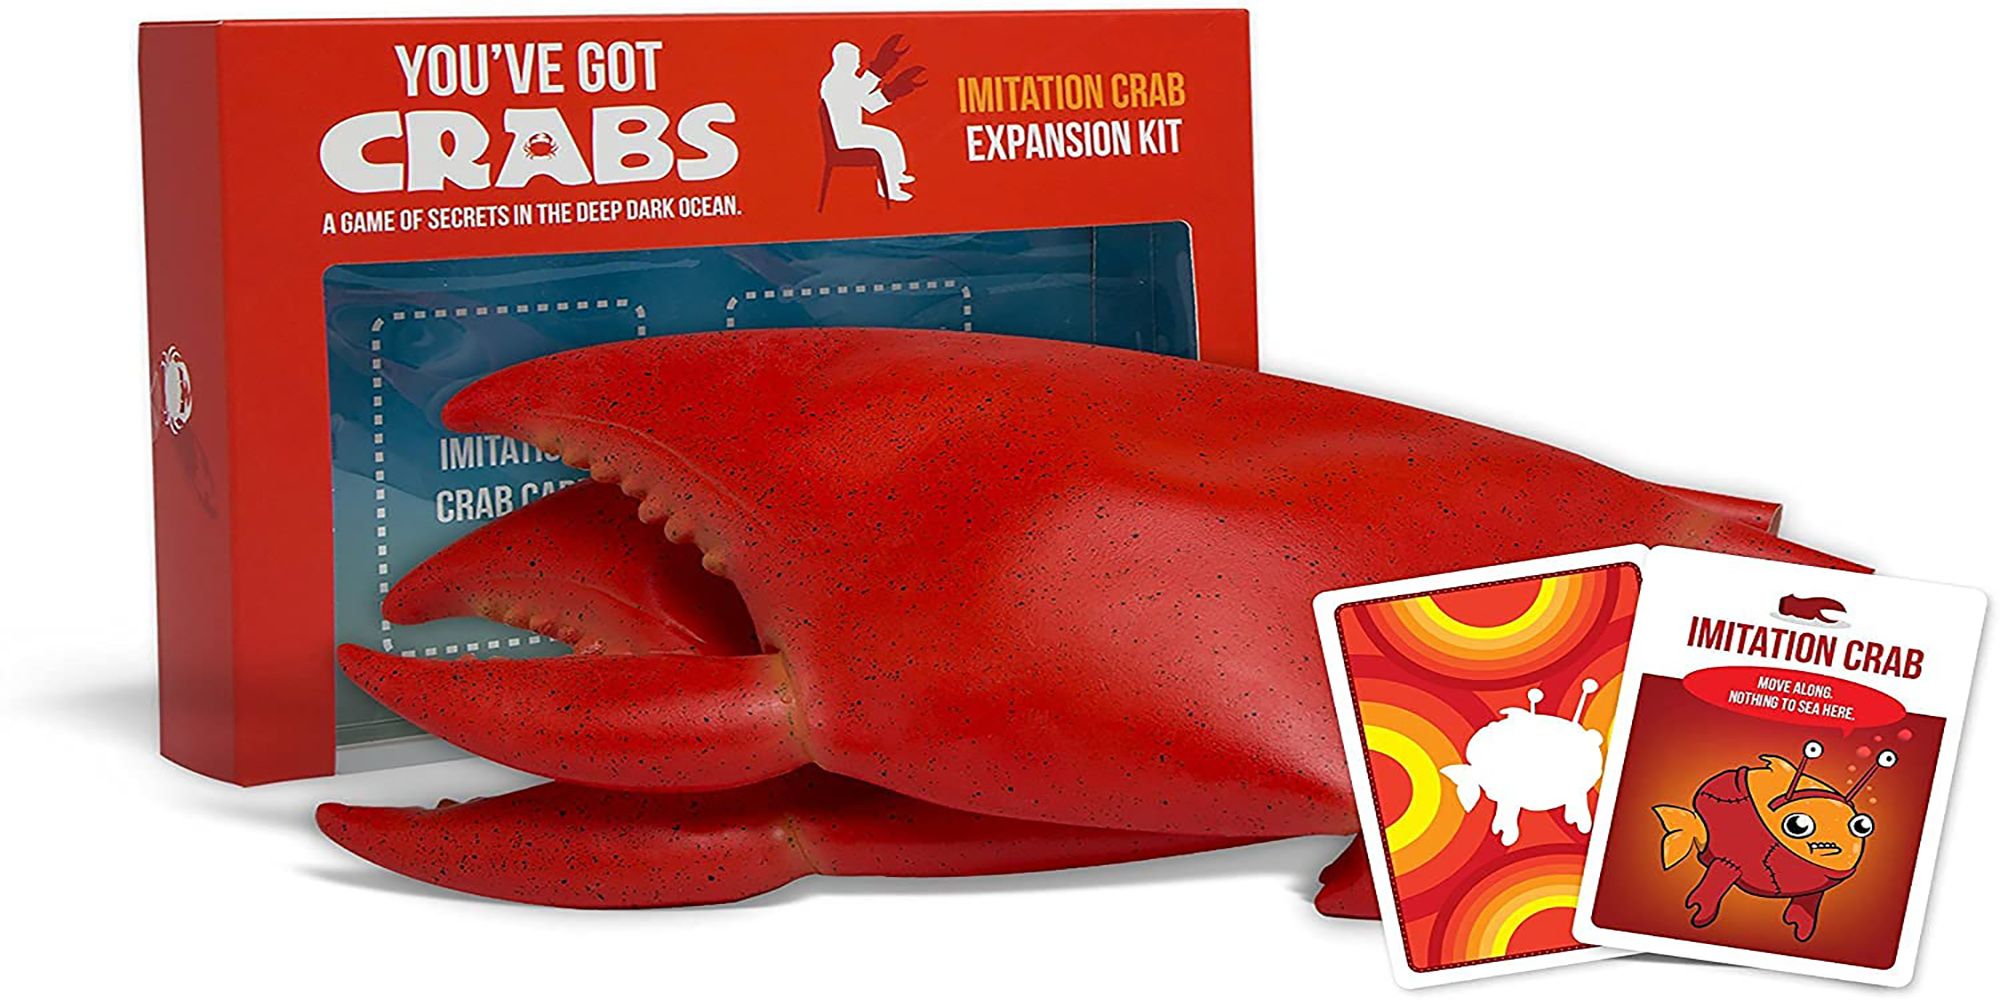 A giant pair of crab claws and two "Imitation Crab" cards sit in front of the You've Got Crabs Expansion kit.